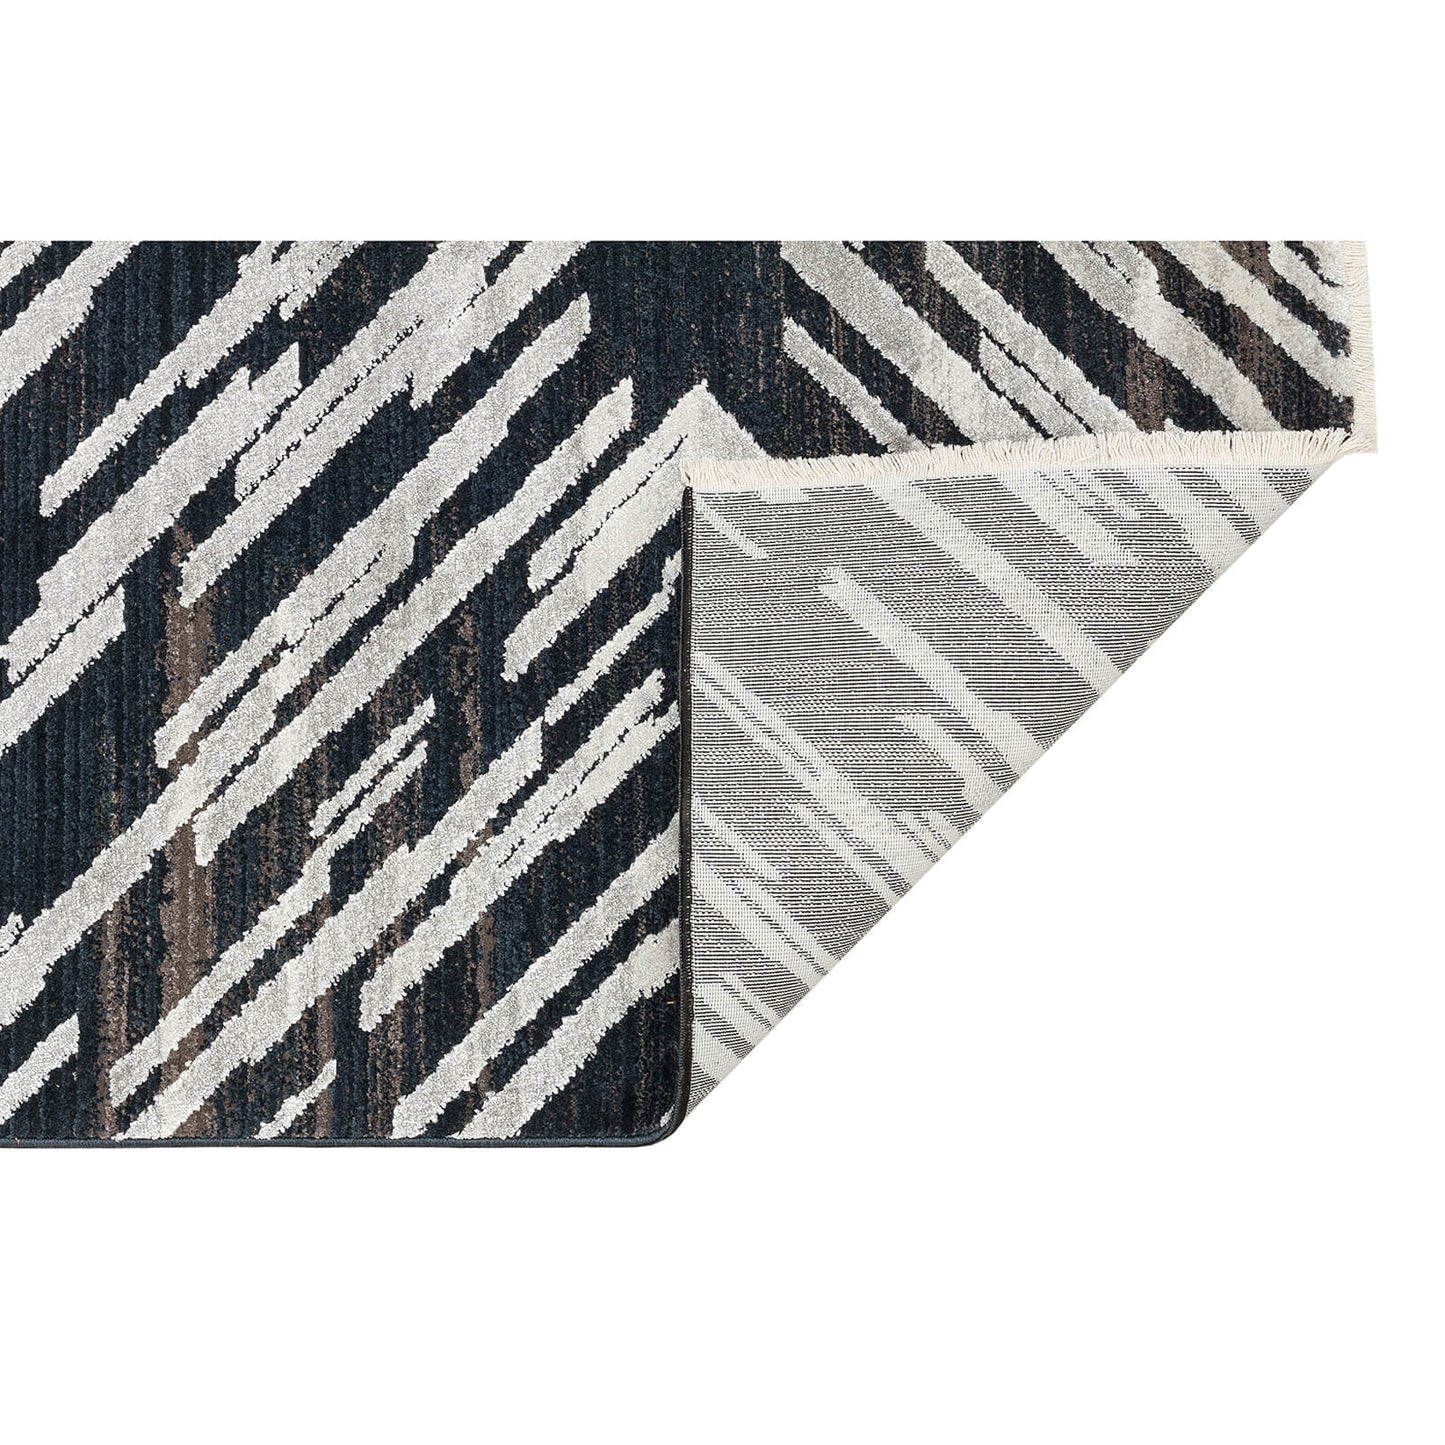 Concept Looms Onyx ONX02 Midnight Rug